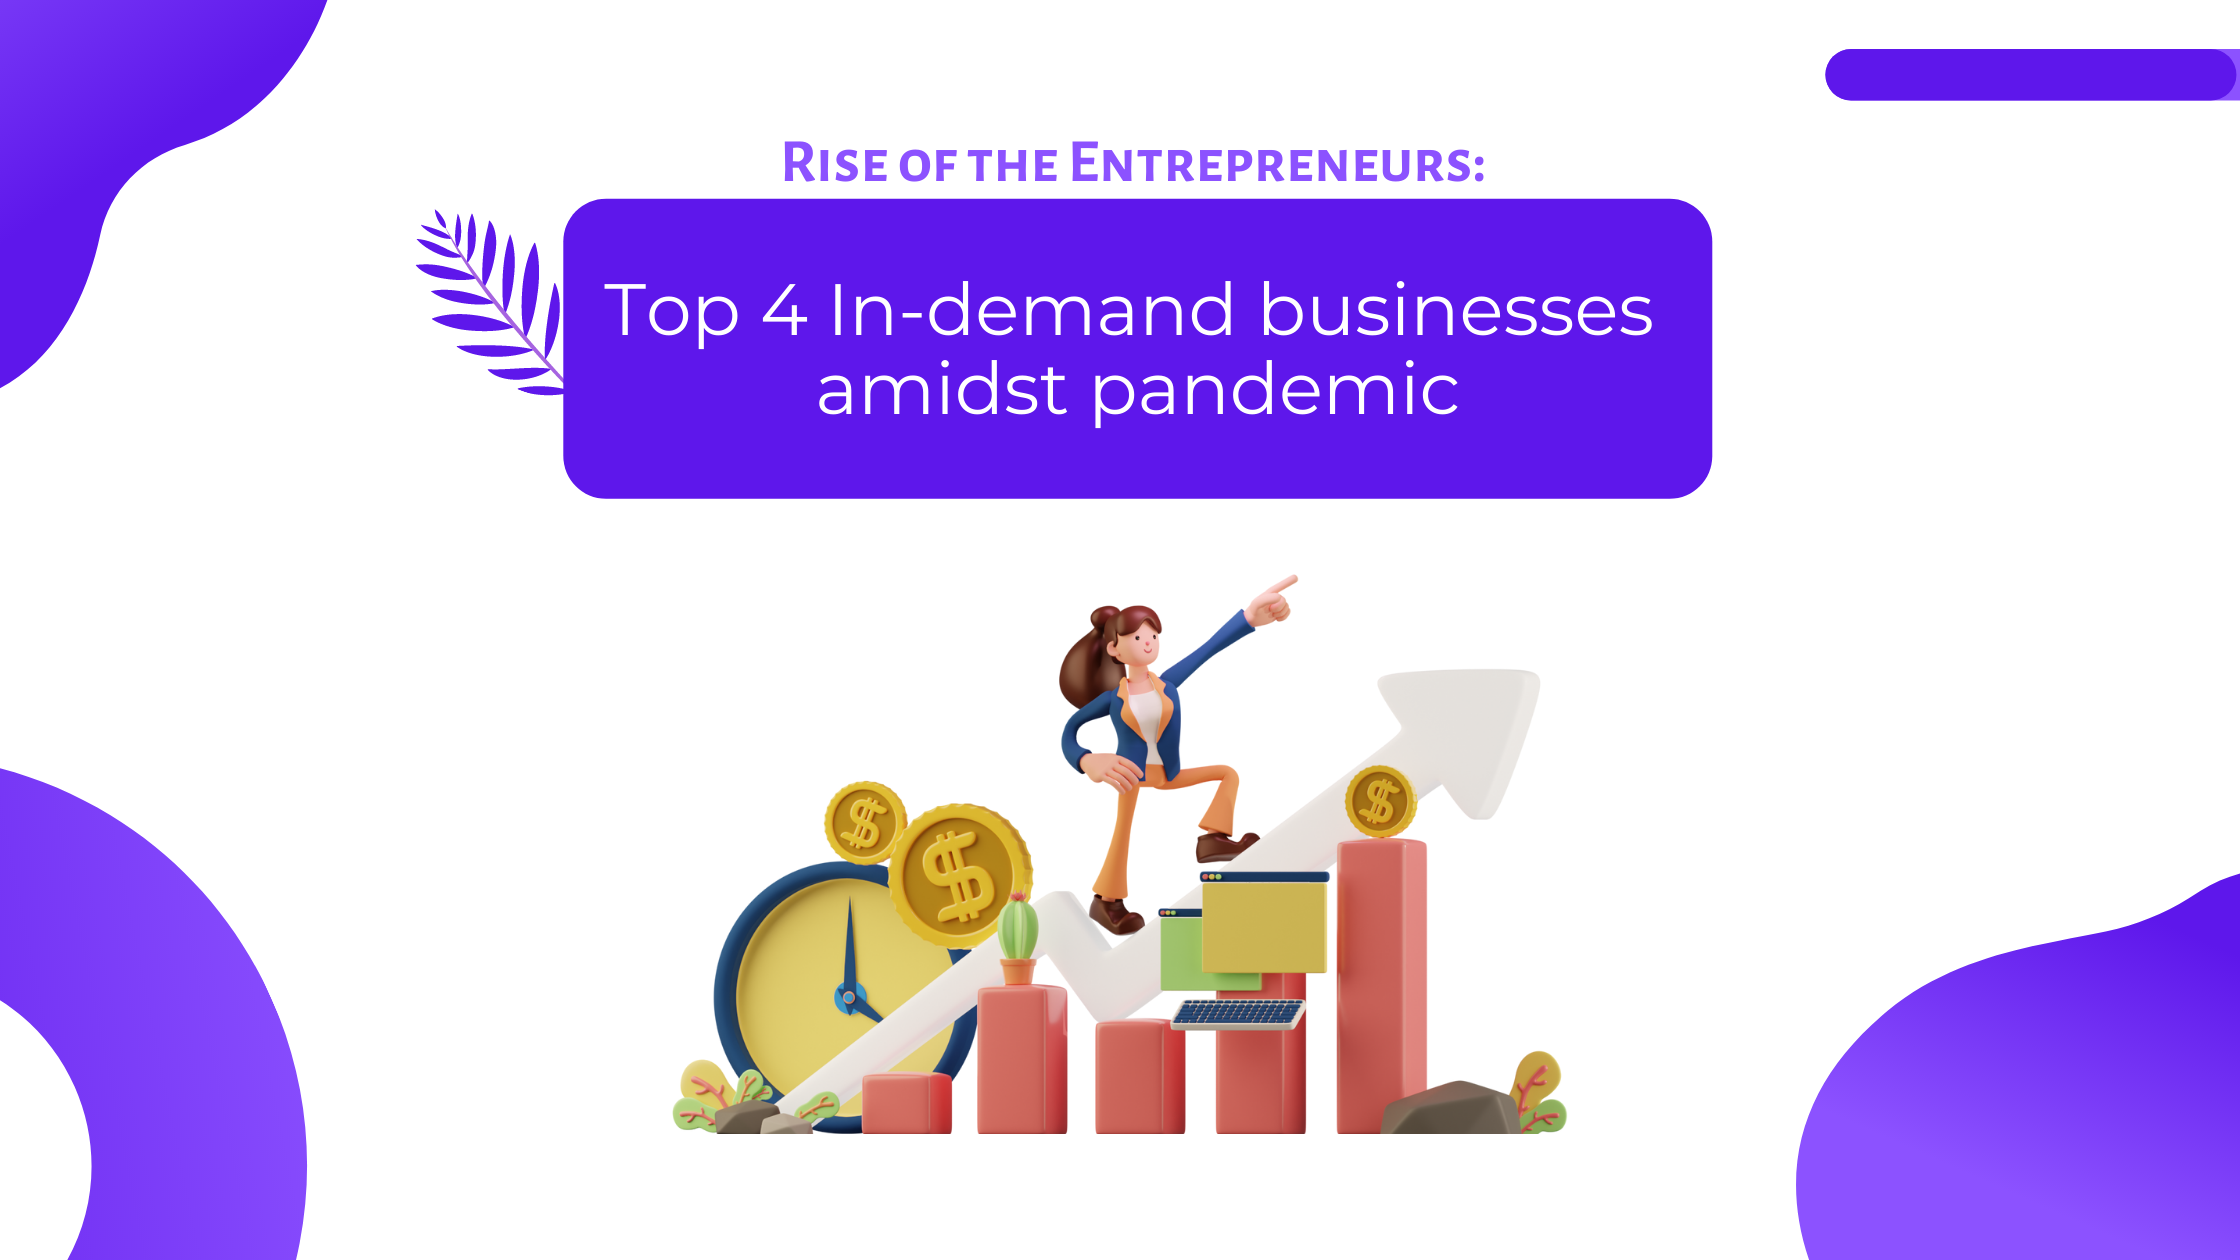 Rise of the Entrepreneurs Top 4 In-demand businesses amidst pandemic